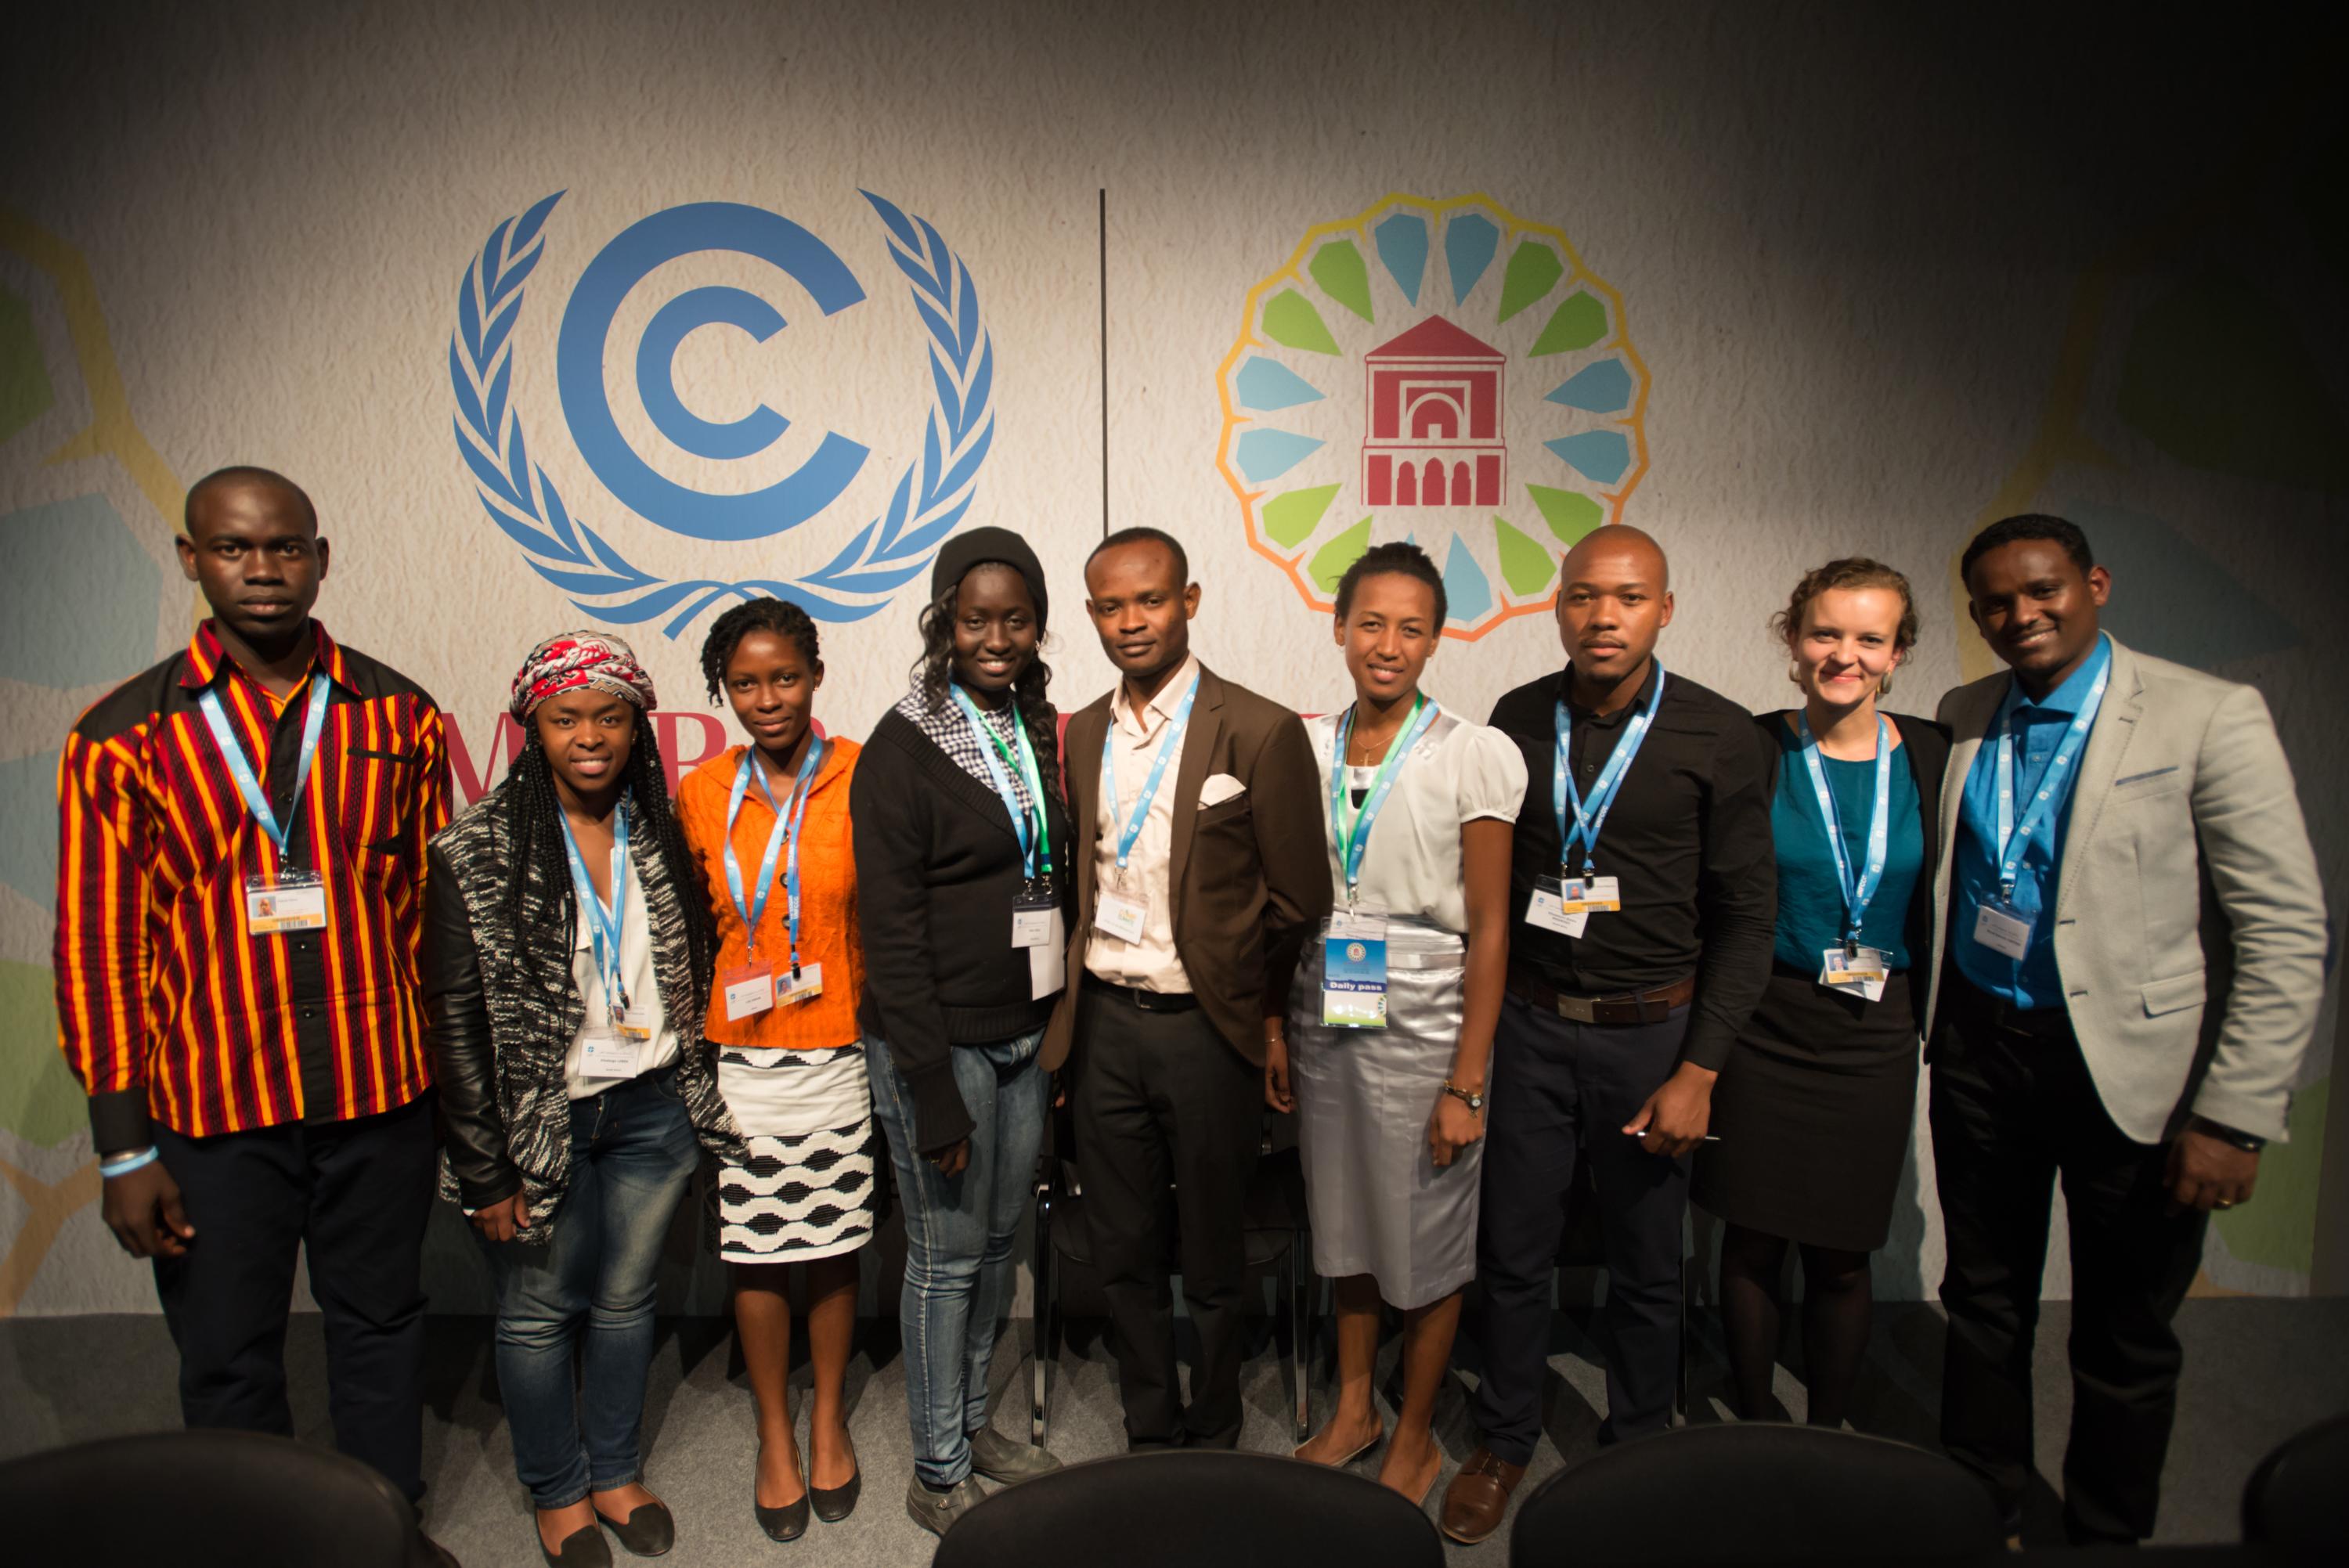 The LWF youth delegation to the COP22 UN climate conference in Marrakech, Morocco. (l-r) Pascal Kama, The Lutheran Church of Senegal; Ditebogo Caroline Lebea, Evangelical Lutheran Church in Southern Africa, South Africa; Lily Kwaw, Evangelical Lutheran Church of Ghana; Mari Oumar Sall, LWF World Service Mauritania; CÃ©drick Yumba Kitwa, Evangelical Lutheran Church in Congo; Mami Brunah Aro Sandaniaina, Malagasy Lutheran Church, Madagascar; Khulekani Sizwe Magwasa, Evangelical Lutheran Church i